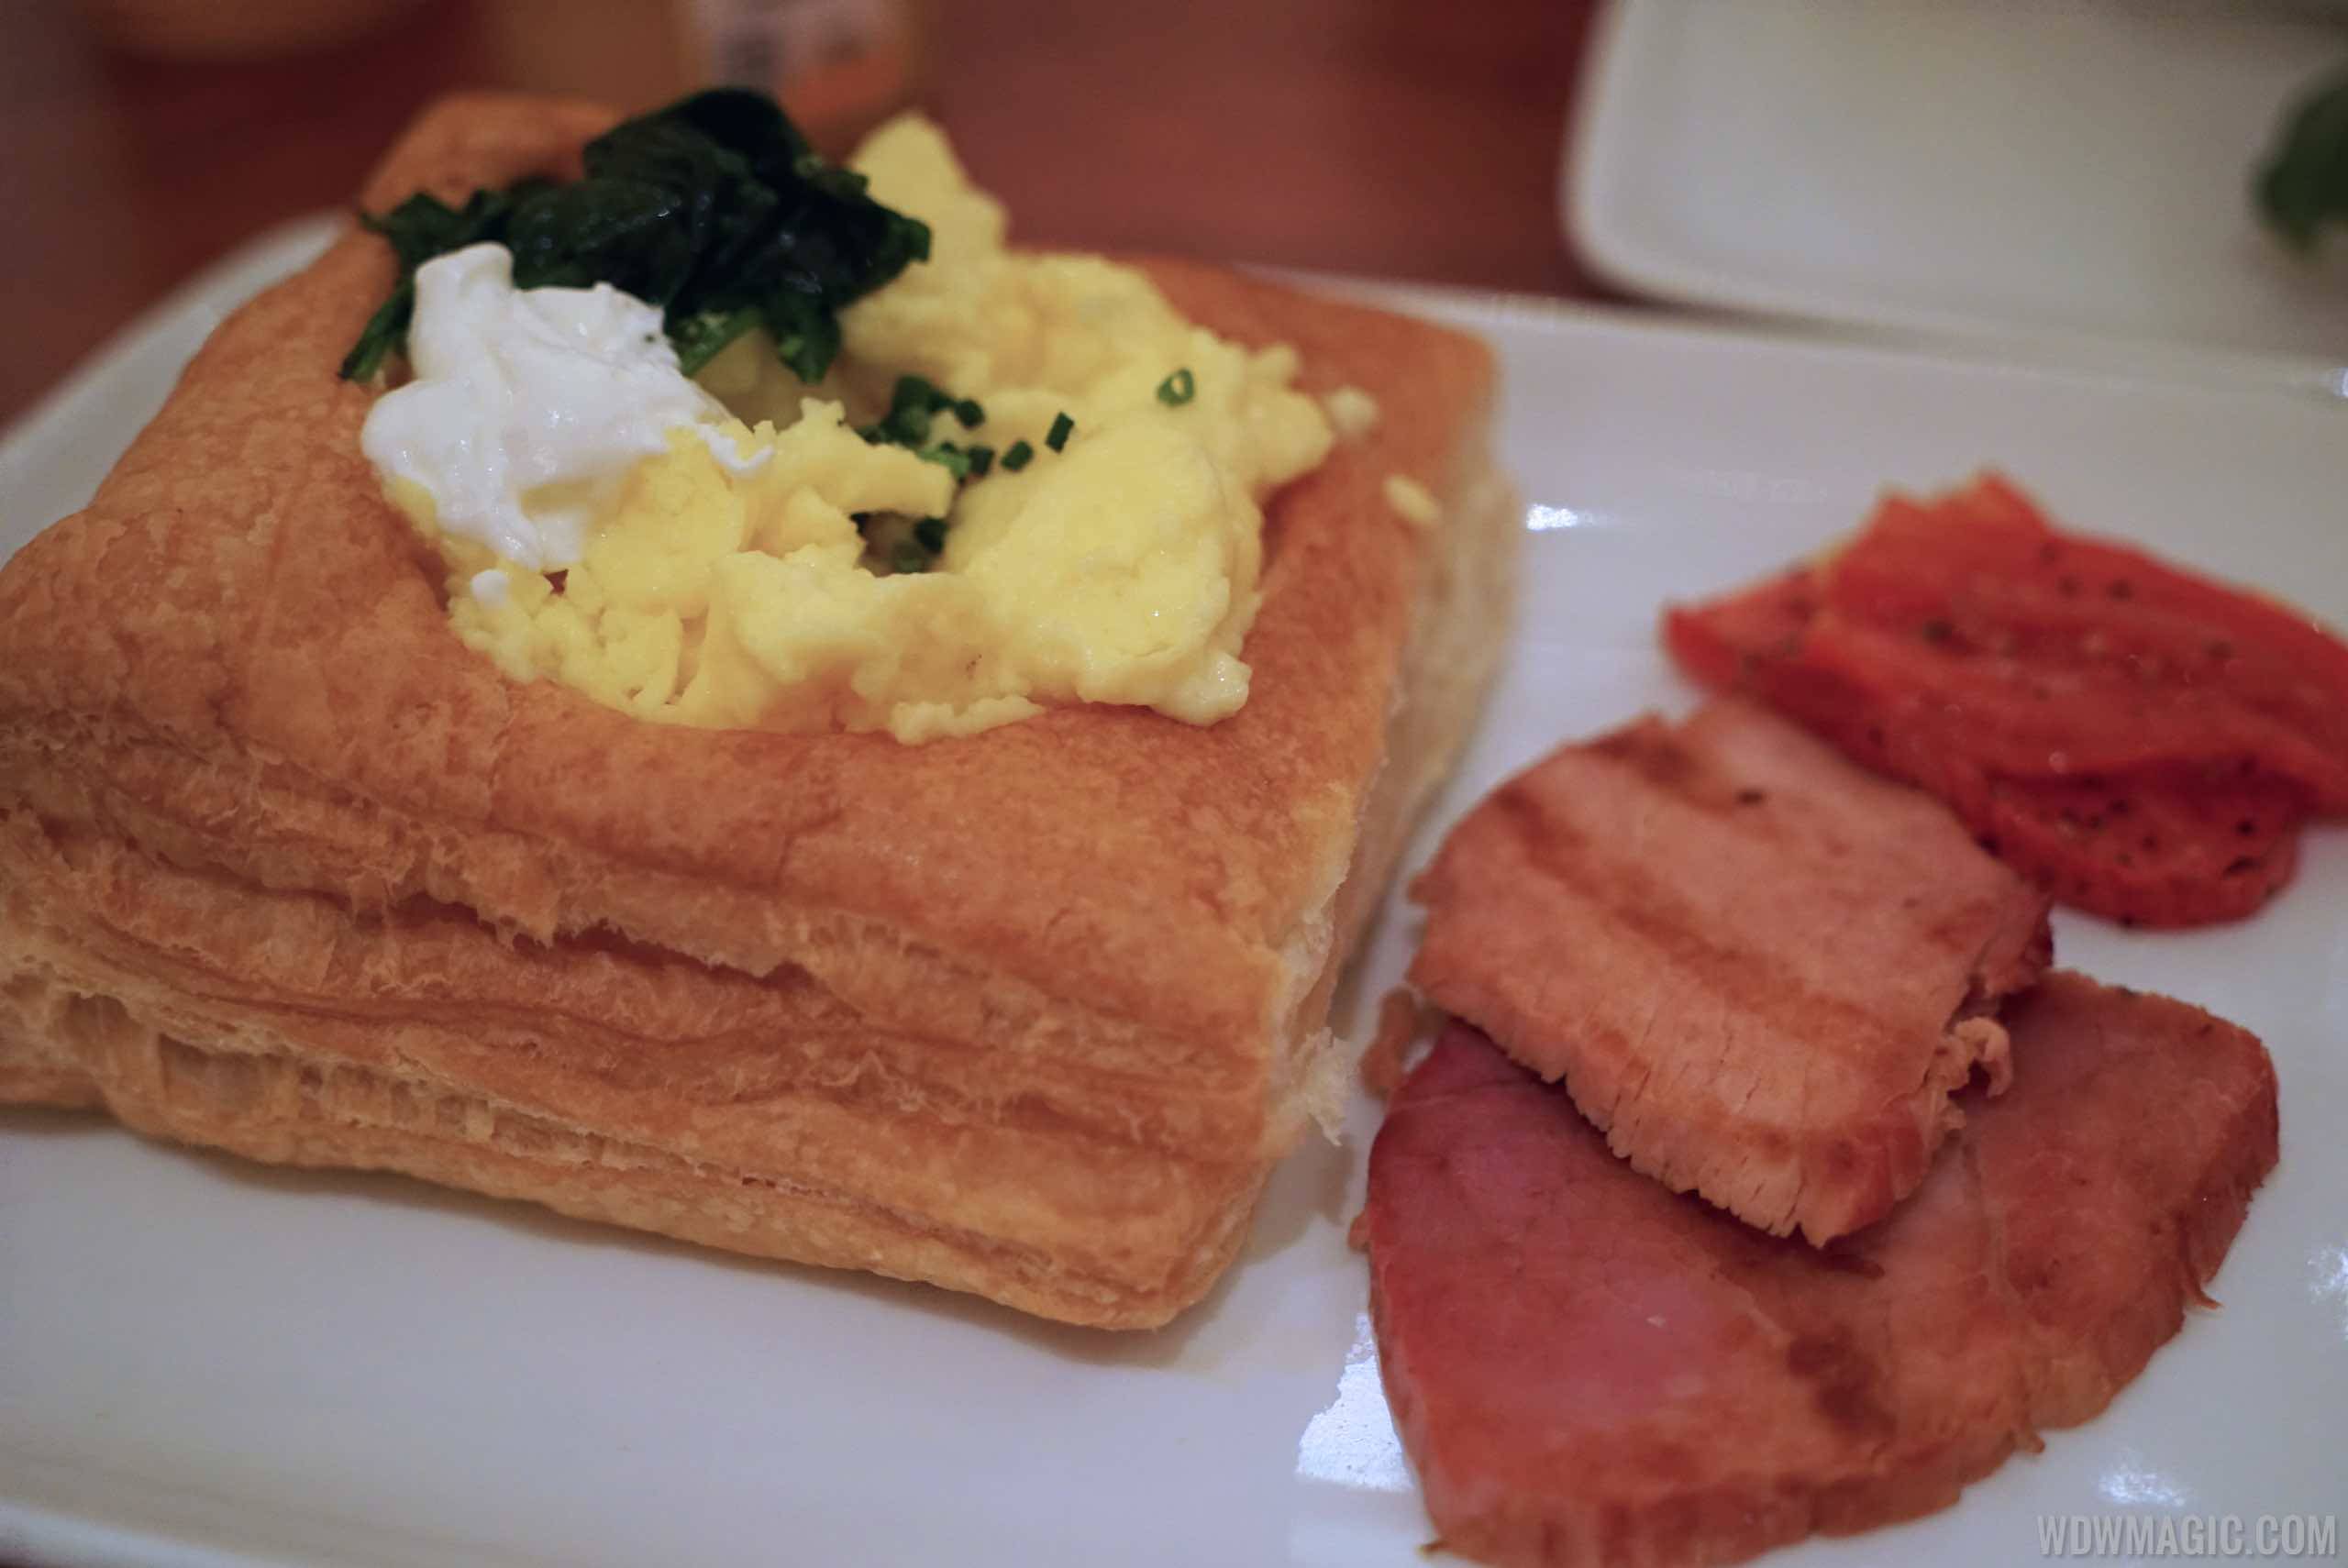 PHOTOS - A quick look at the new breakfast offering at Be Our Guest Restaurant